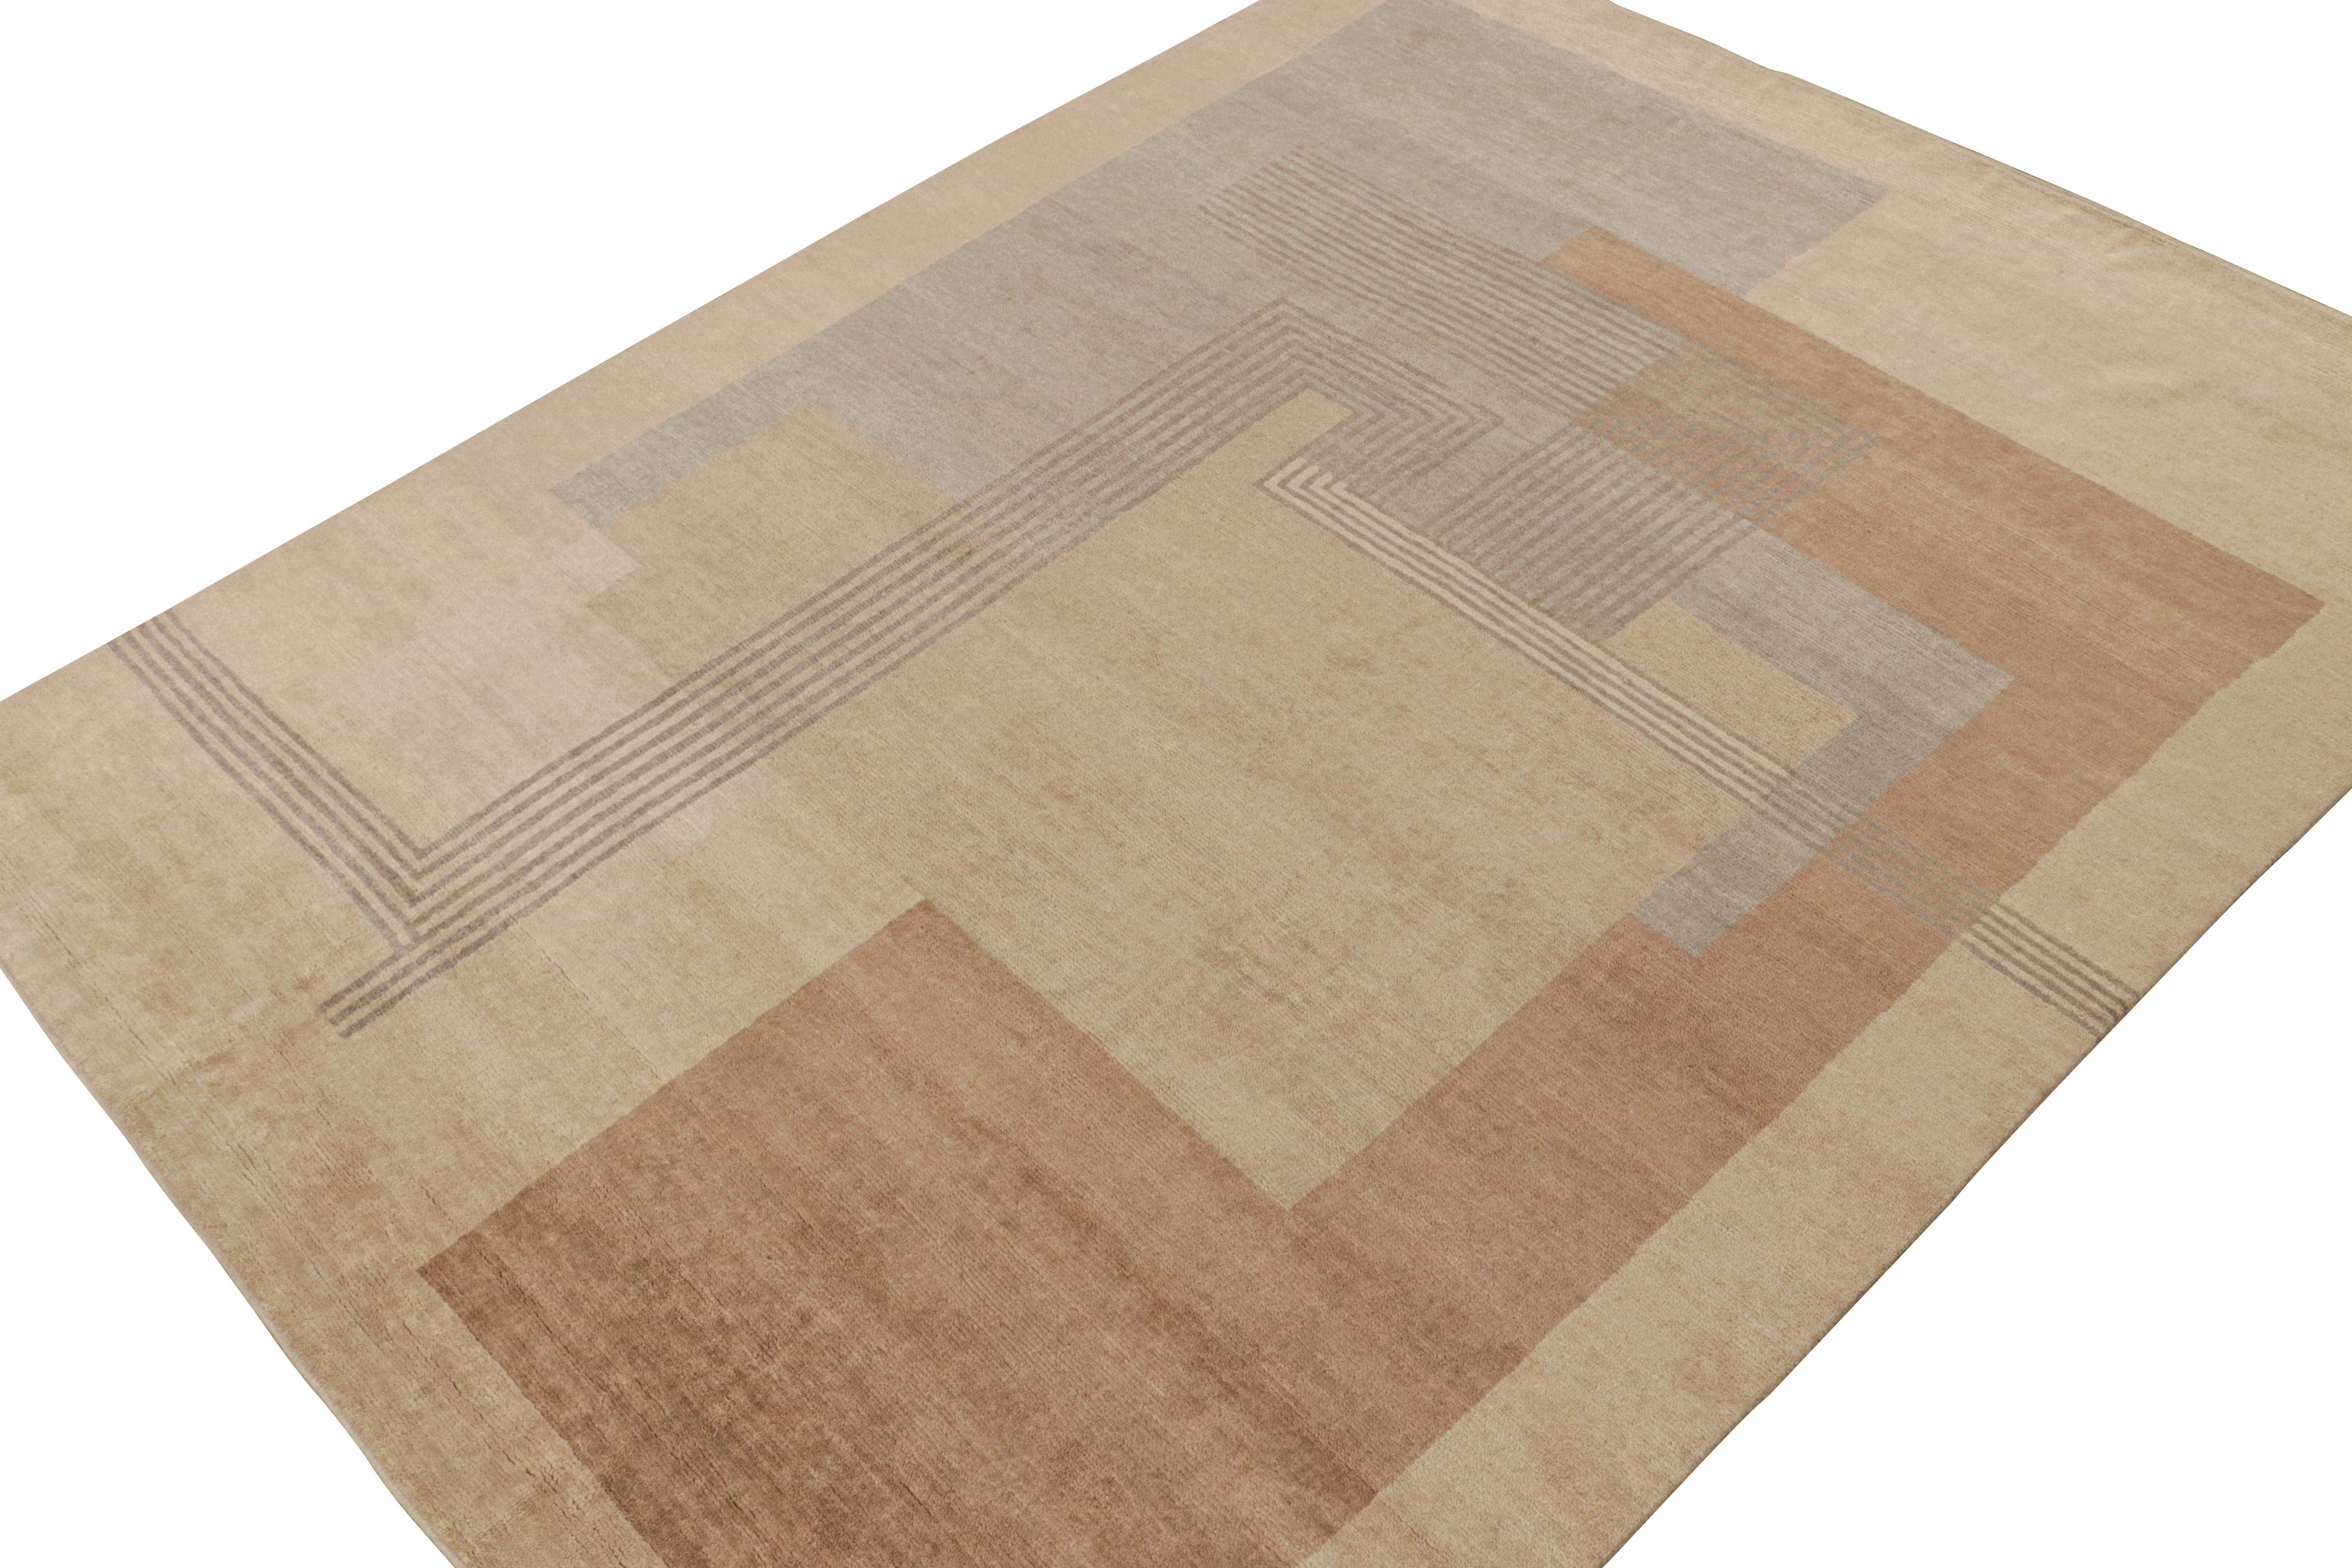 Hand-Woven Rug & Kilim’s French Art Deco Style Rug in Beige-Brown & Grey Geometric Pattern For Sale